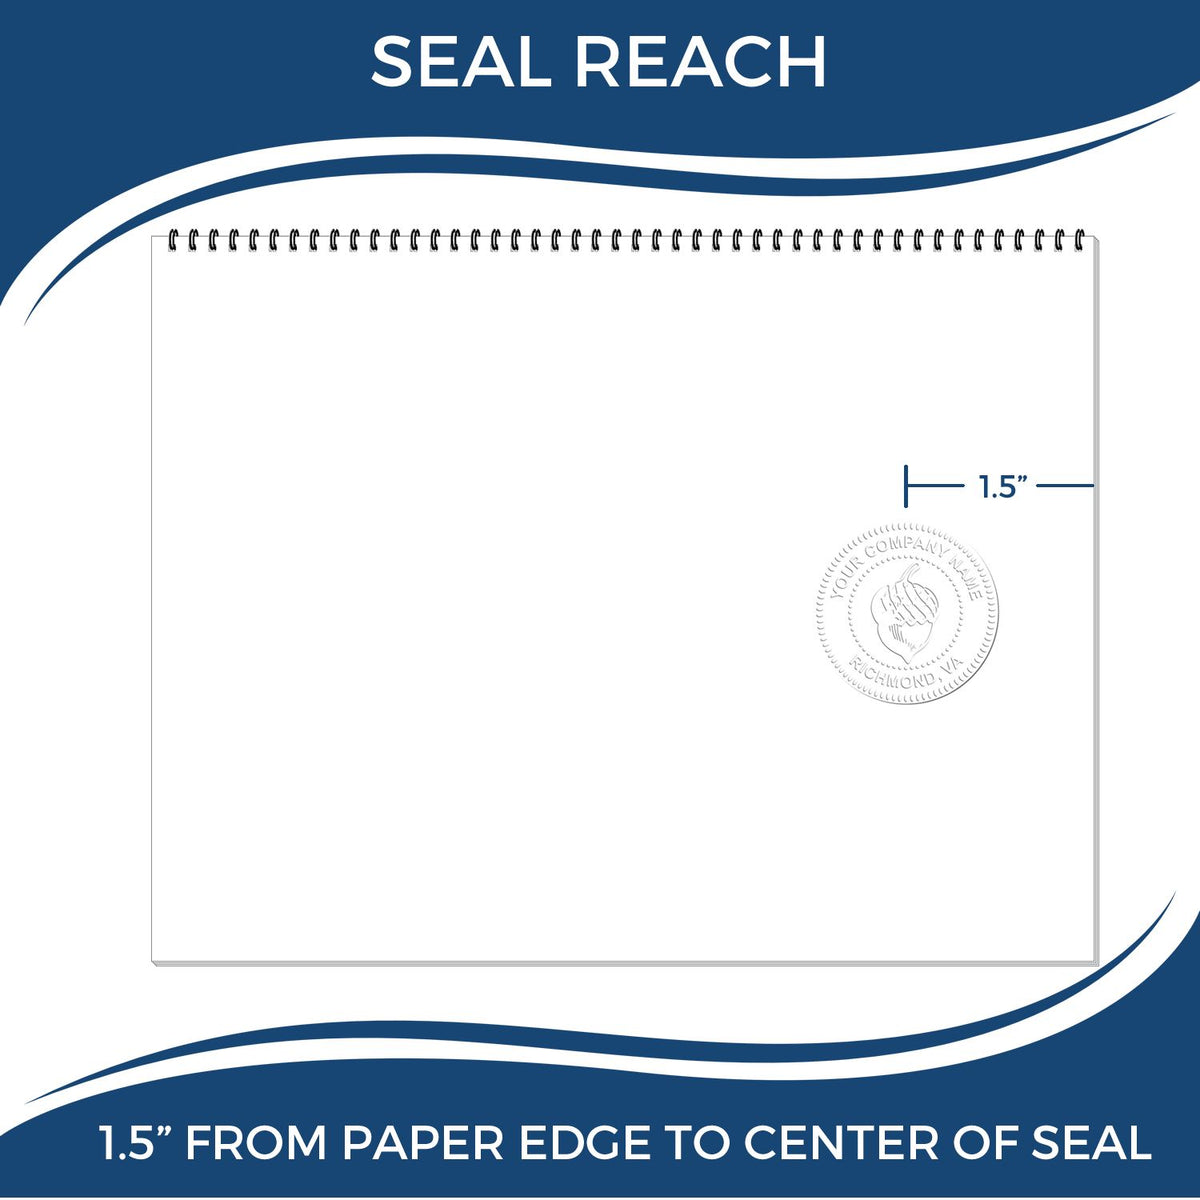 An infographic showing the seal reach which is represented by a ruler and a miniature seal image of the State of West Virginia Architectural Seal Embosser